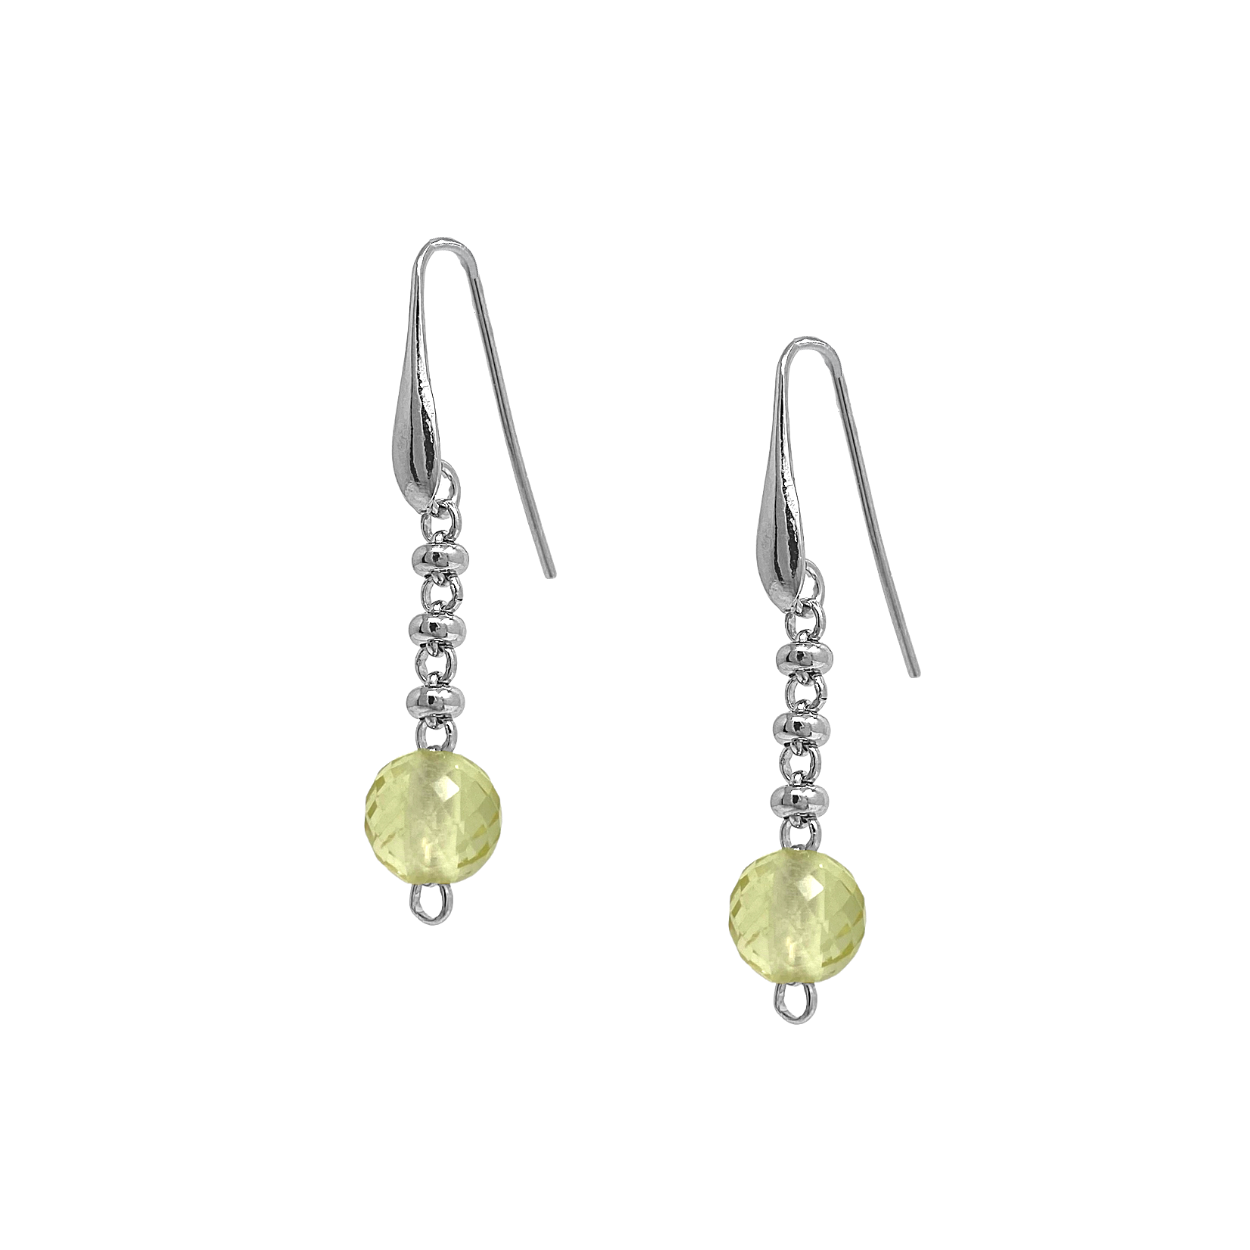 Bubbles Color Earrings in Silver with Green Quartz